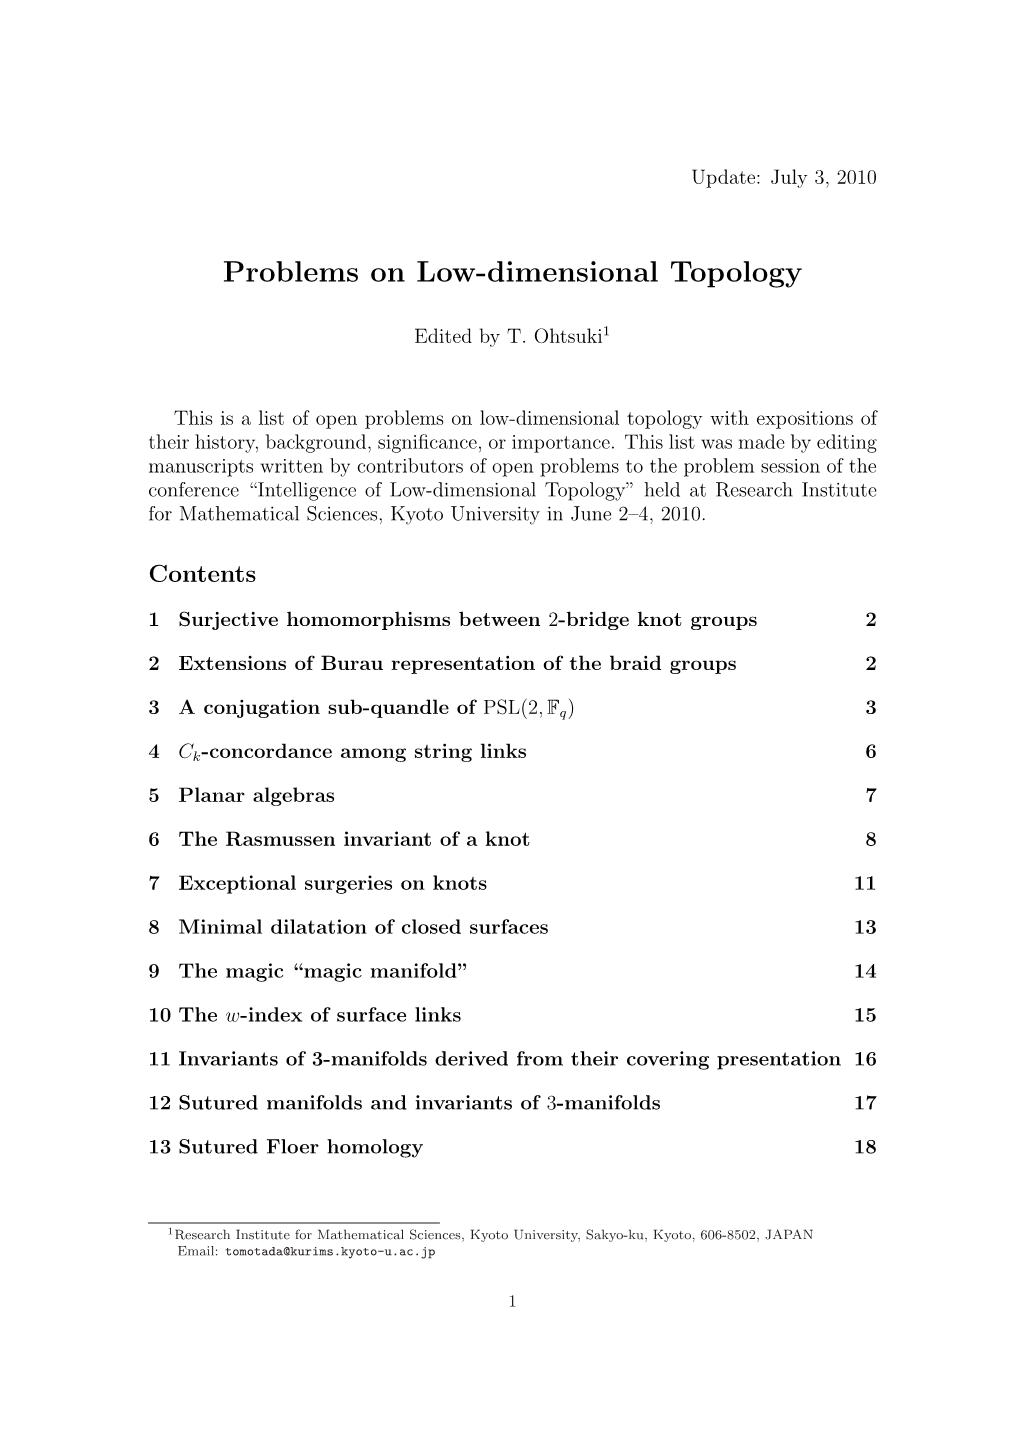 Problems on Low-Dimensional Topology